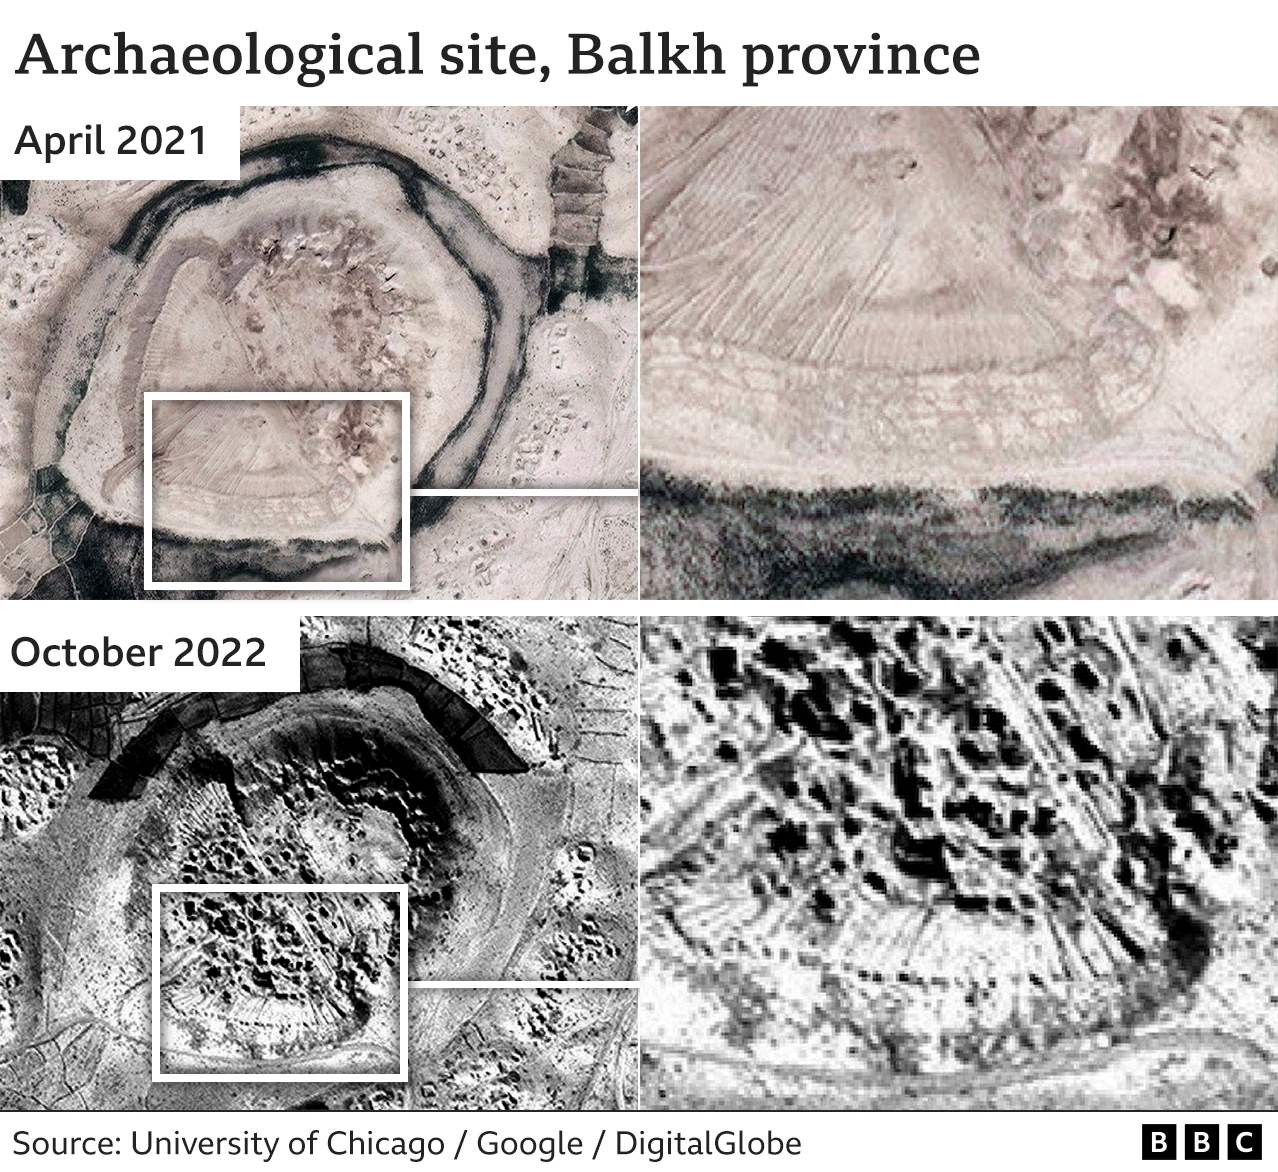 Graphic showing satellite images of an archaeological site in Balkh, Afghanistan, showing what researchers say is evidence of bulldozing in April 2021 and pits dug by looters in October 2022